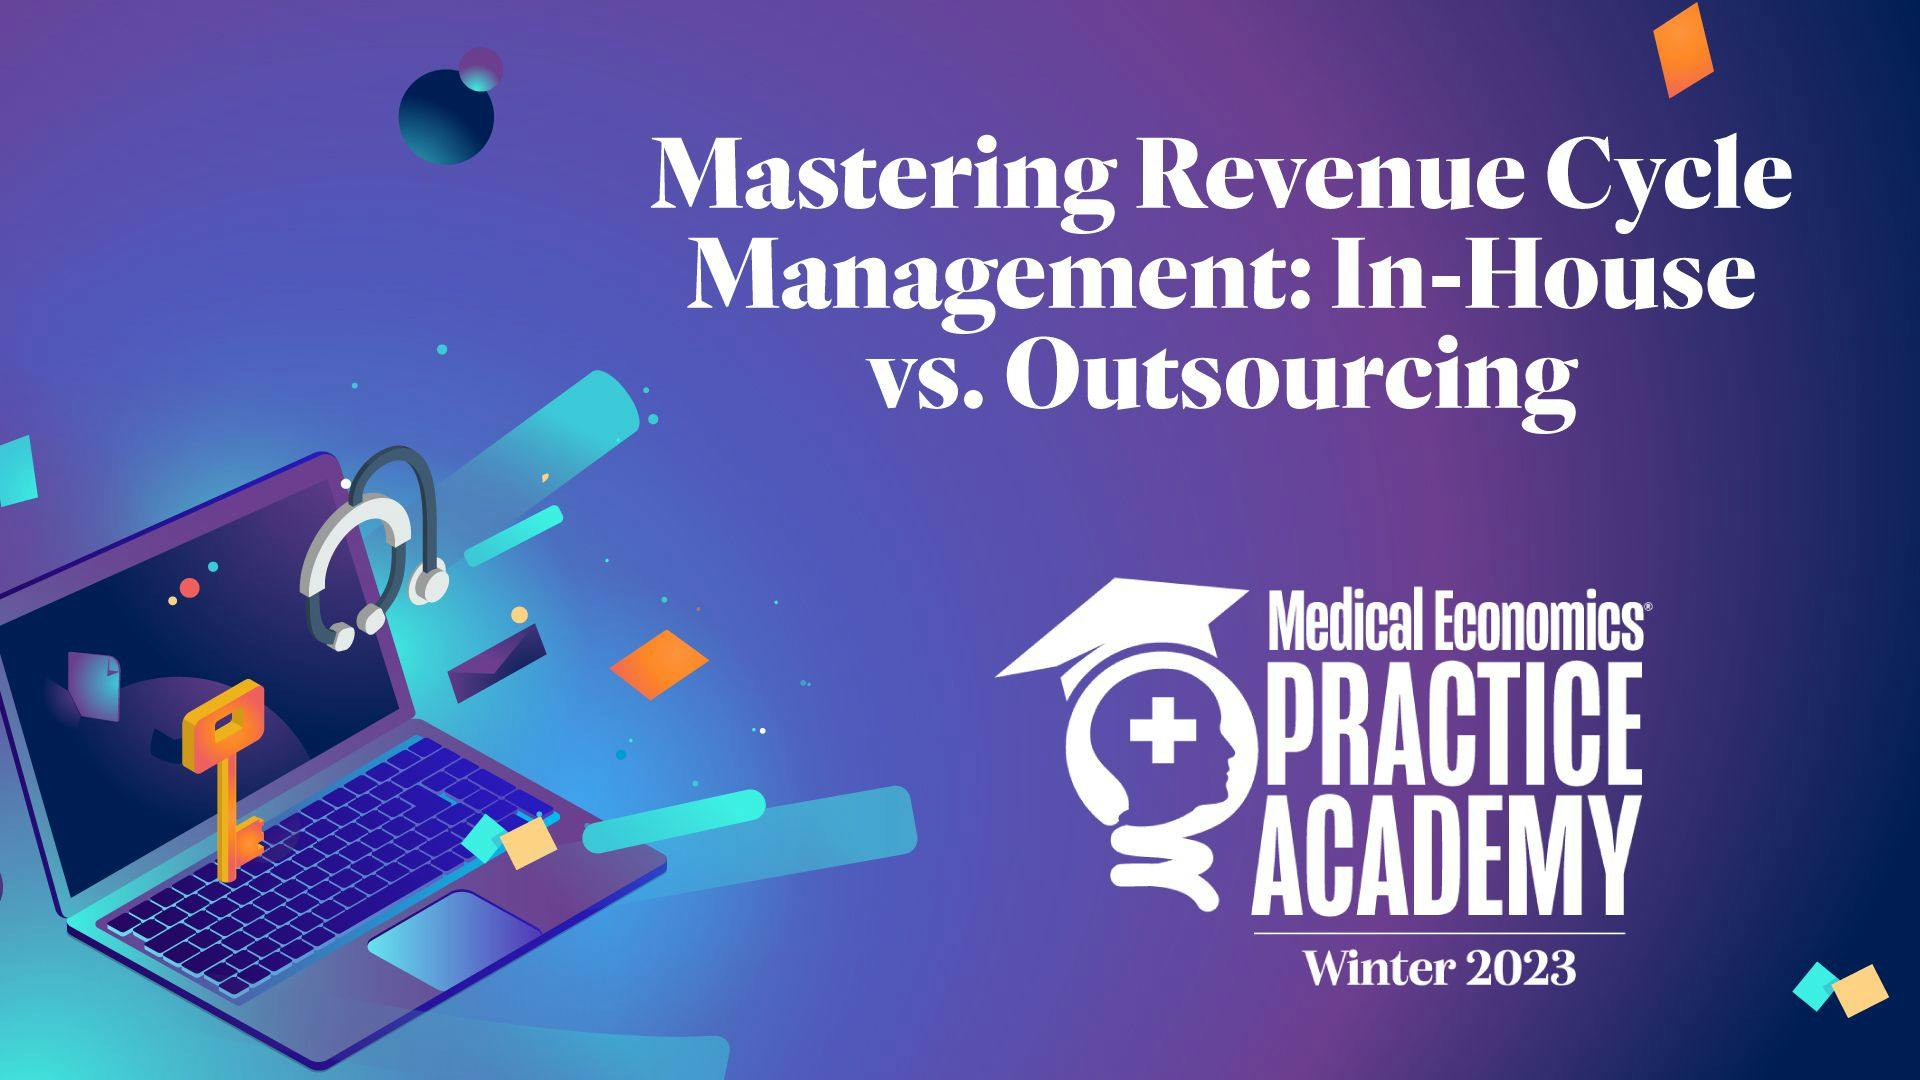 Mastering Revenue Cycle Management: In-House Versus Outsourcing